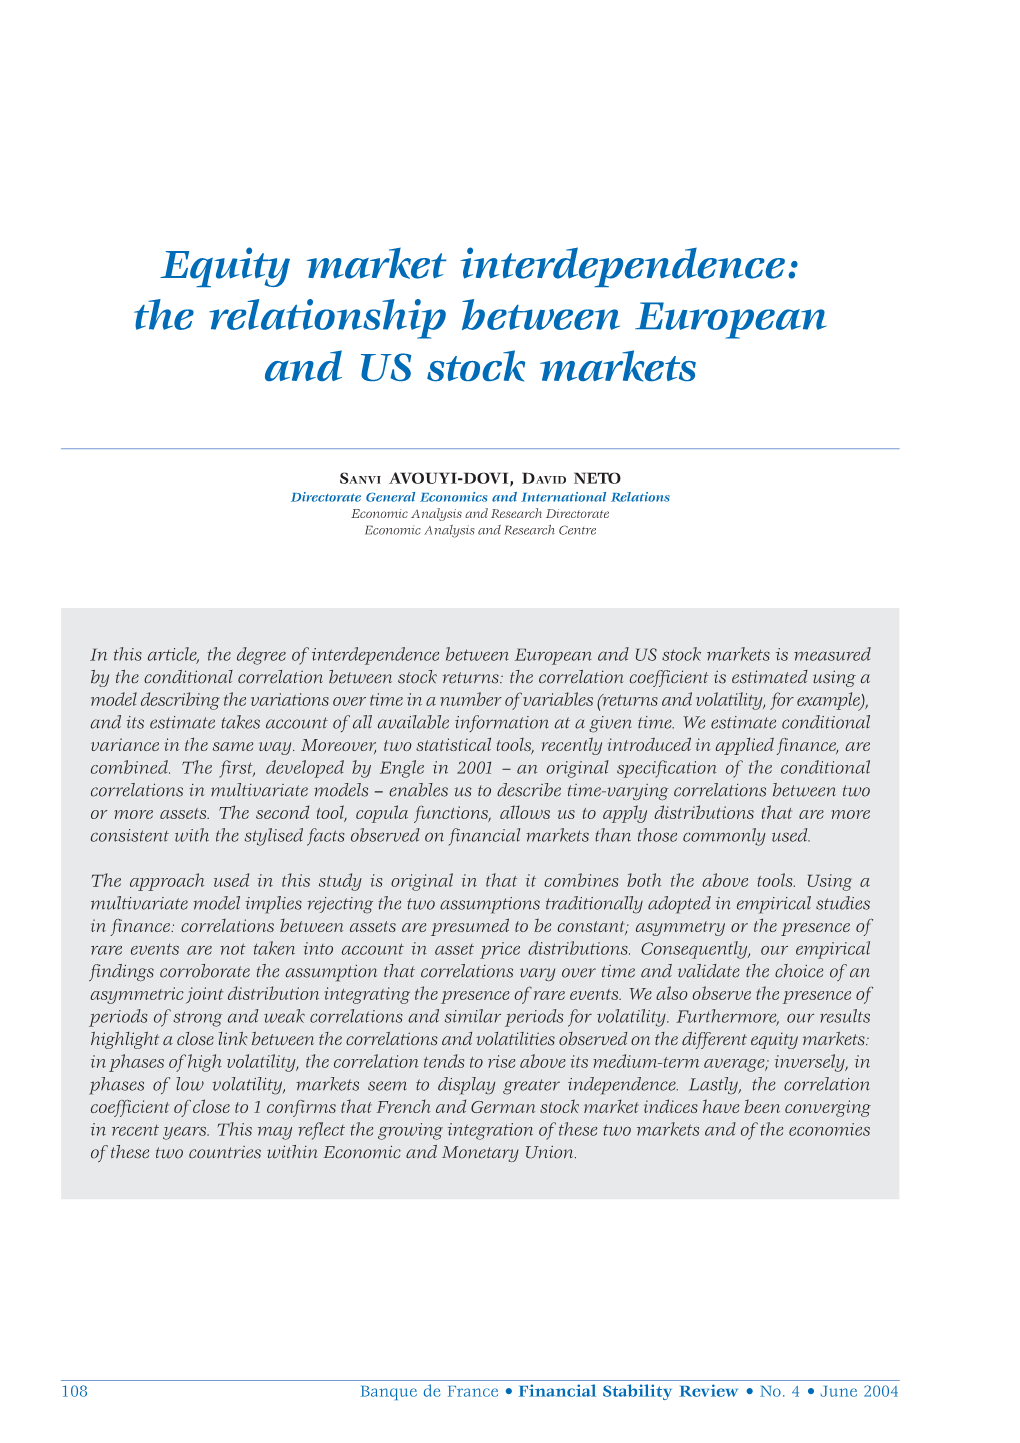 The Relationship Between European and US Stock Markets